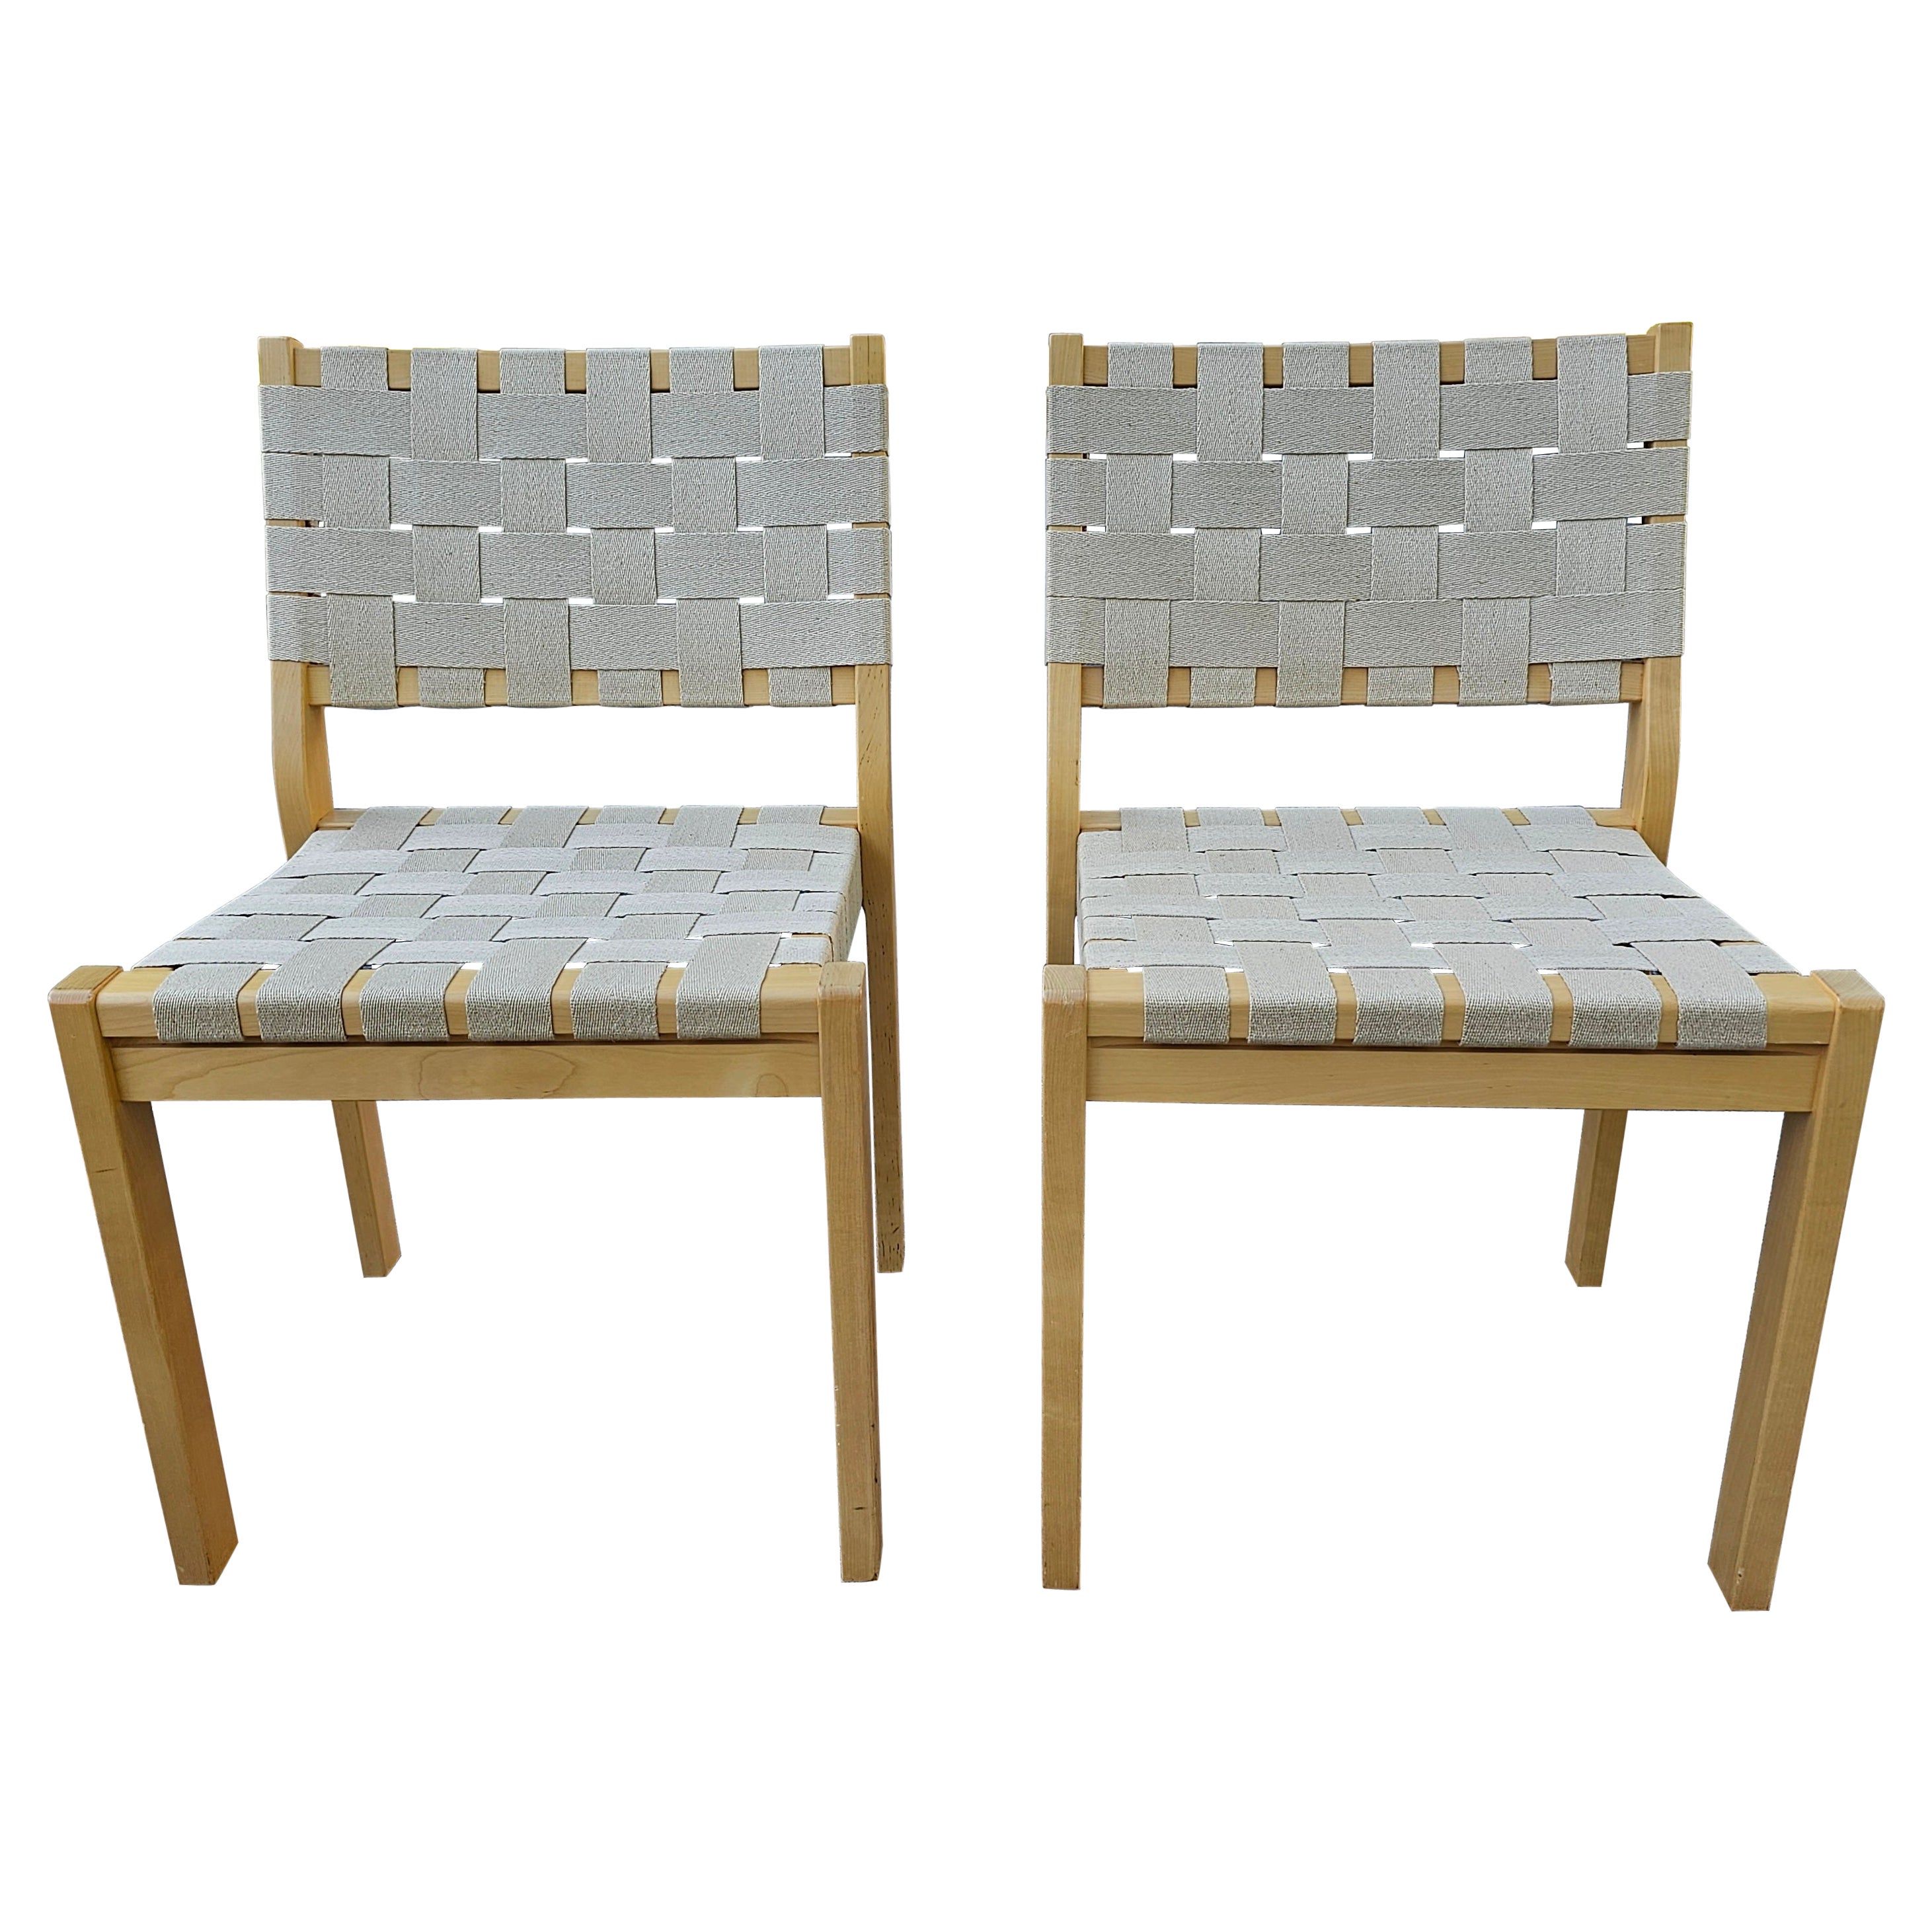 Pair of Jens Risom Style Cotton Canvas Webbed and Maple Chairs For Sale